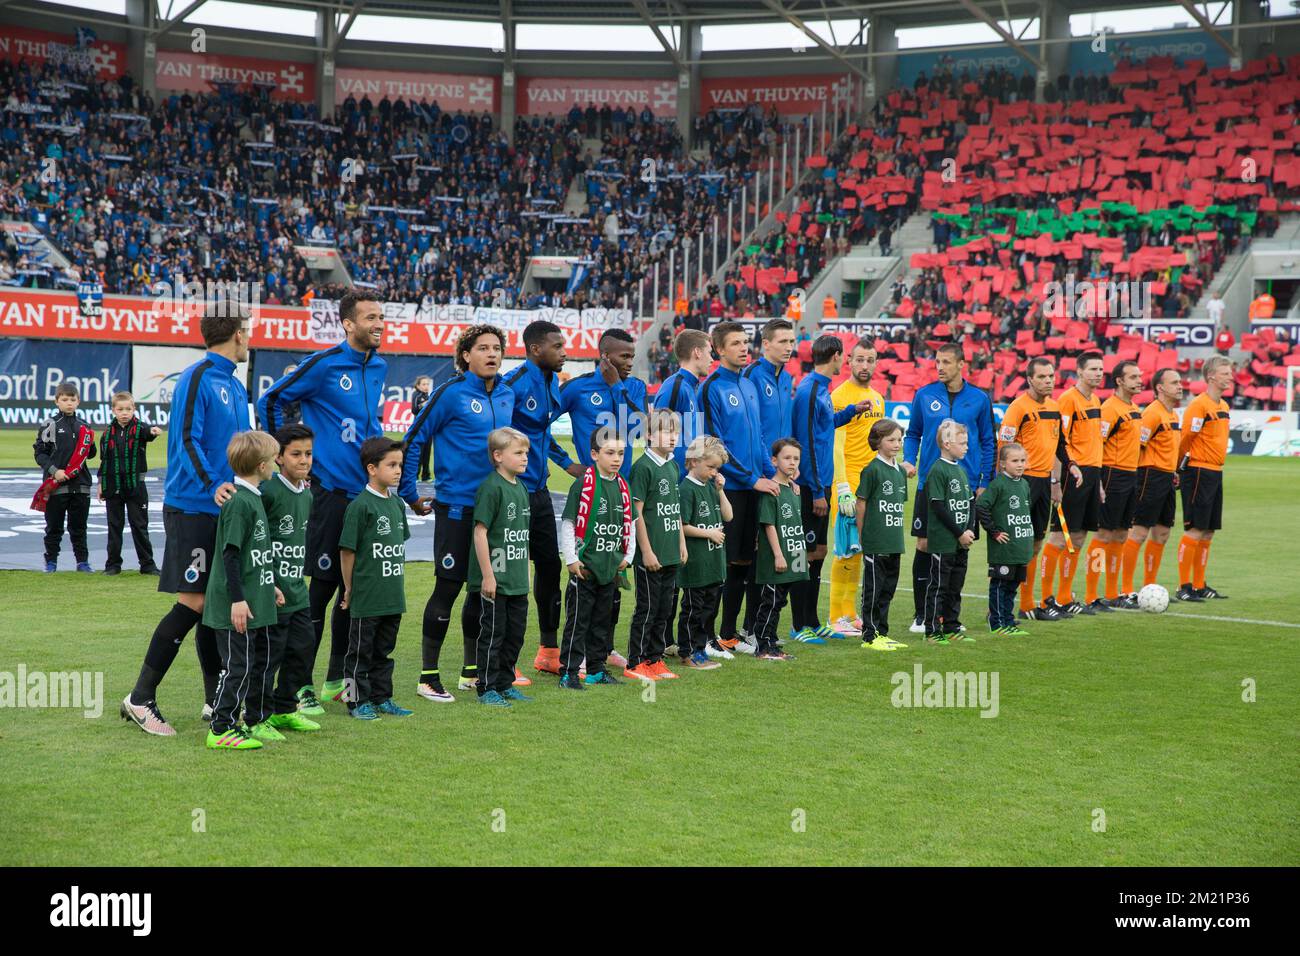 Club's players pictured ahead of the Jupiler Pro League match between SV Zulte Waregem and Club Brugge KV, in Waregem, Thursday 19 May 2016, on day 9 of the Play-off 1 of the Belgian soccer championship.  Stock Photo